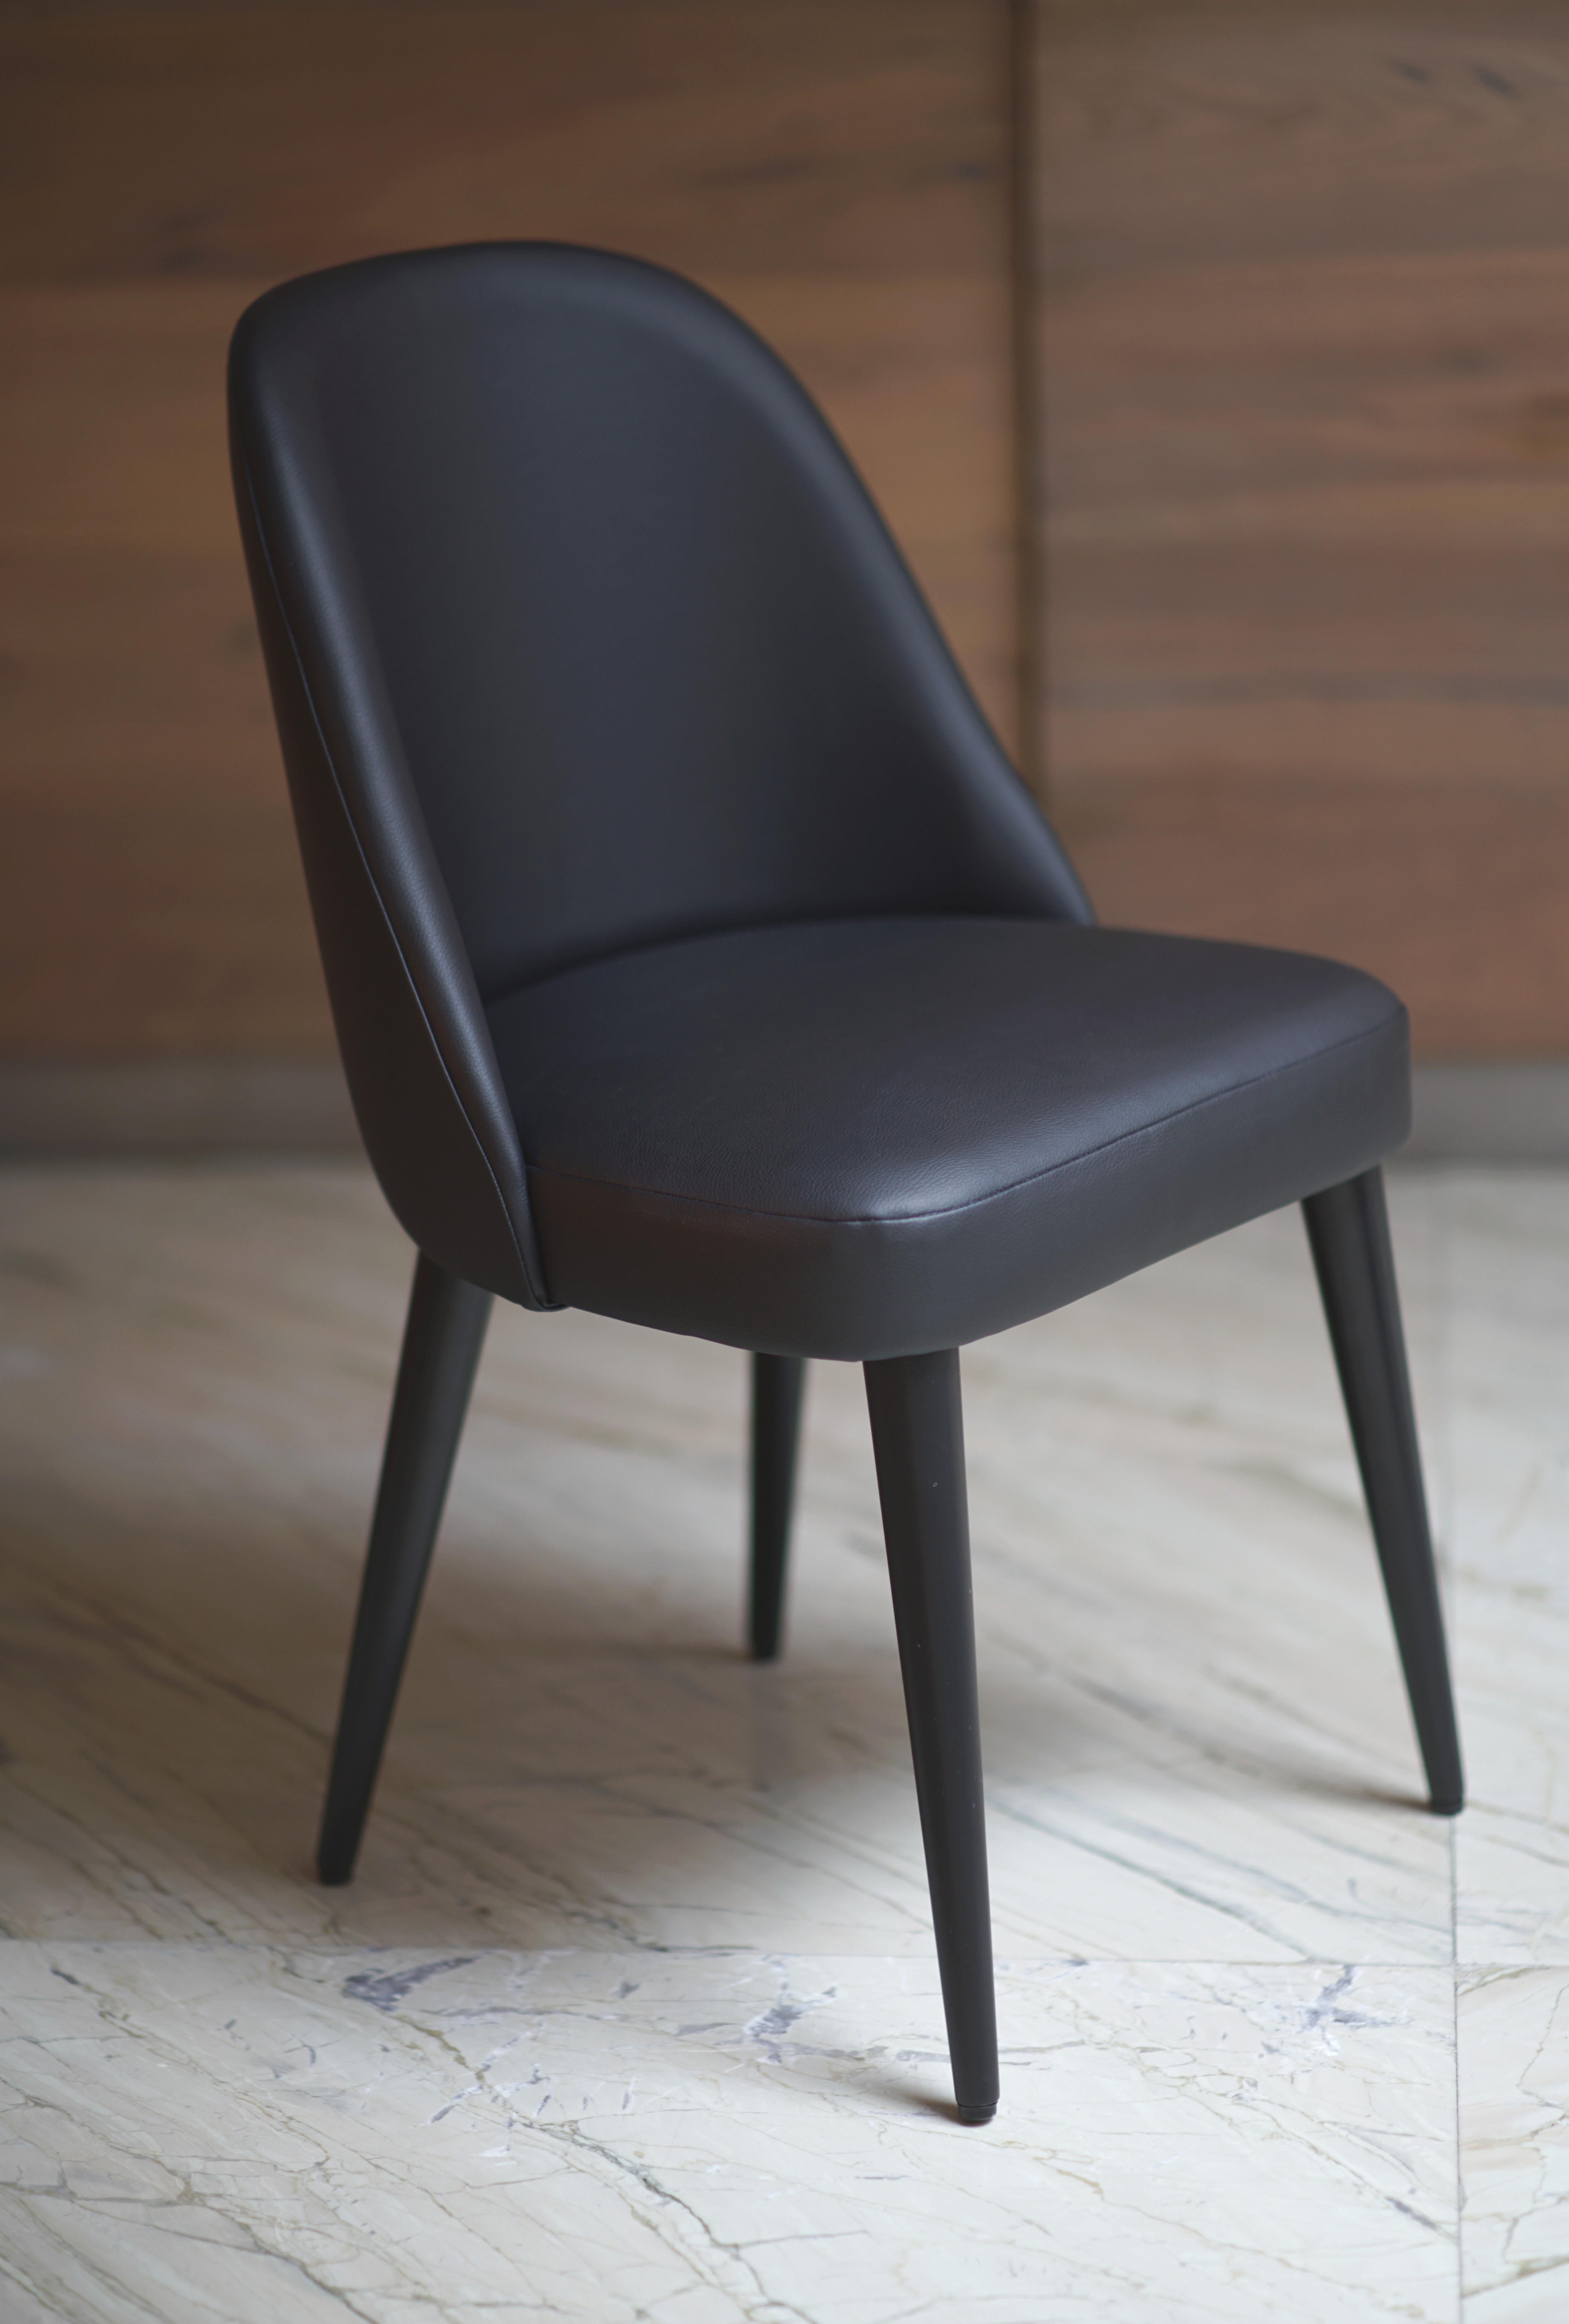 Helsinki collection. Helsinki chair: simple, elegant, comfortable. Available in oak and walnut base or in custom materials, may be upholstered with variety of fabrics and colors. Natural leather and Vegan Leather option available. Also available as